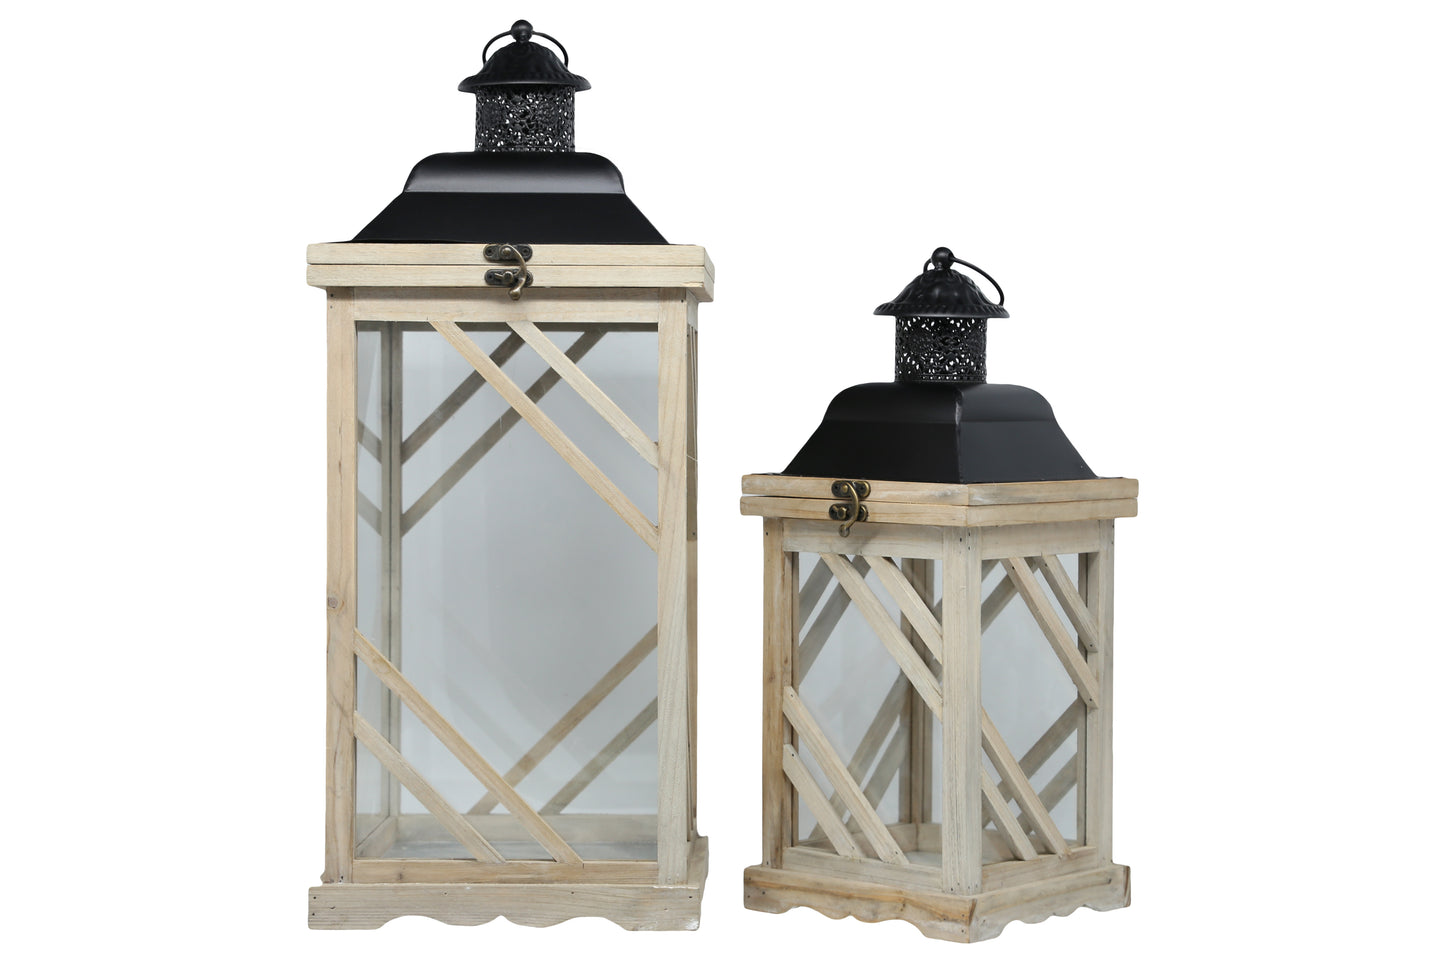 Wood Square Lantern with Black Painted Metal Fliptop Opening, Ring Hanger and Clear Glass Sides